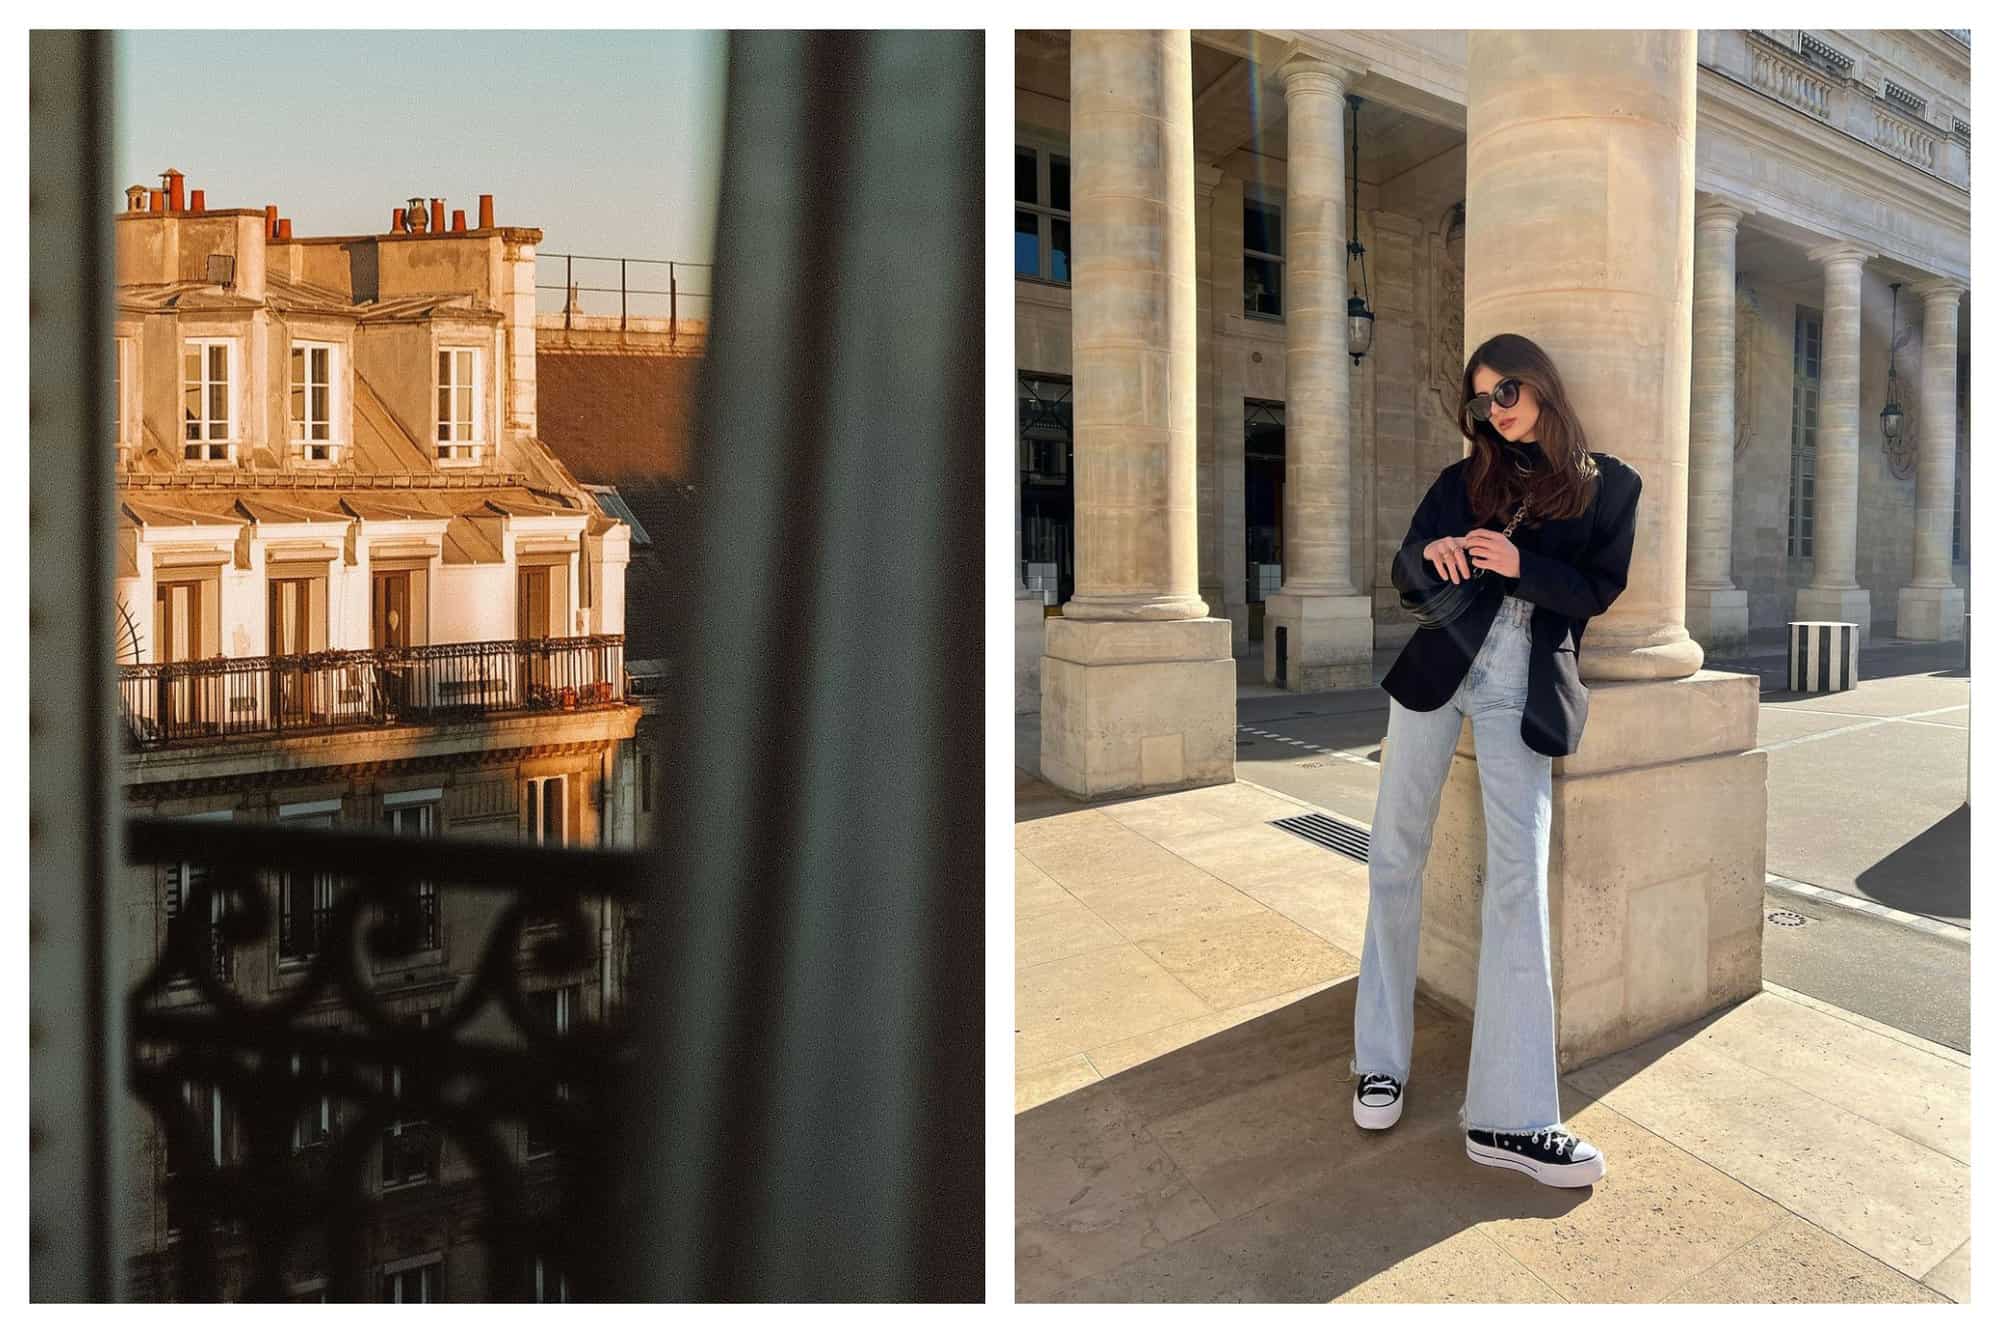 Left-Paris rooftops are shown through a green curtain.
Right-A dark haired woman leans back on a column. She wears jeans, a black blazer, and black sneakers.